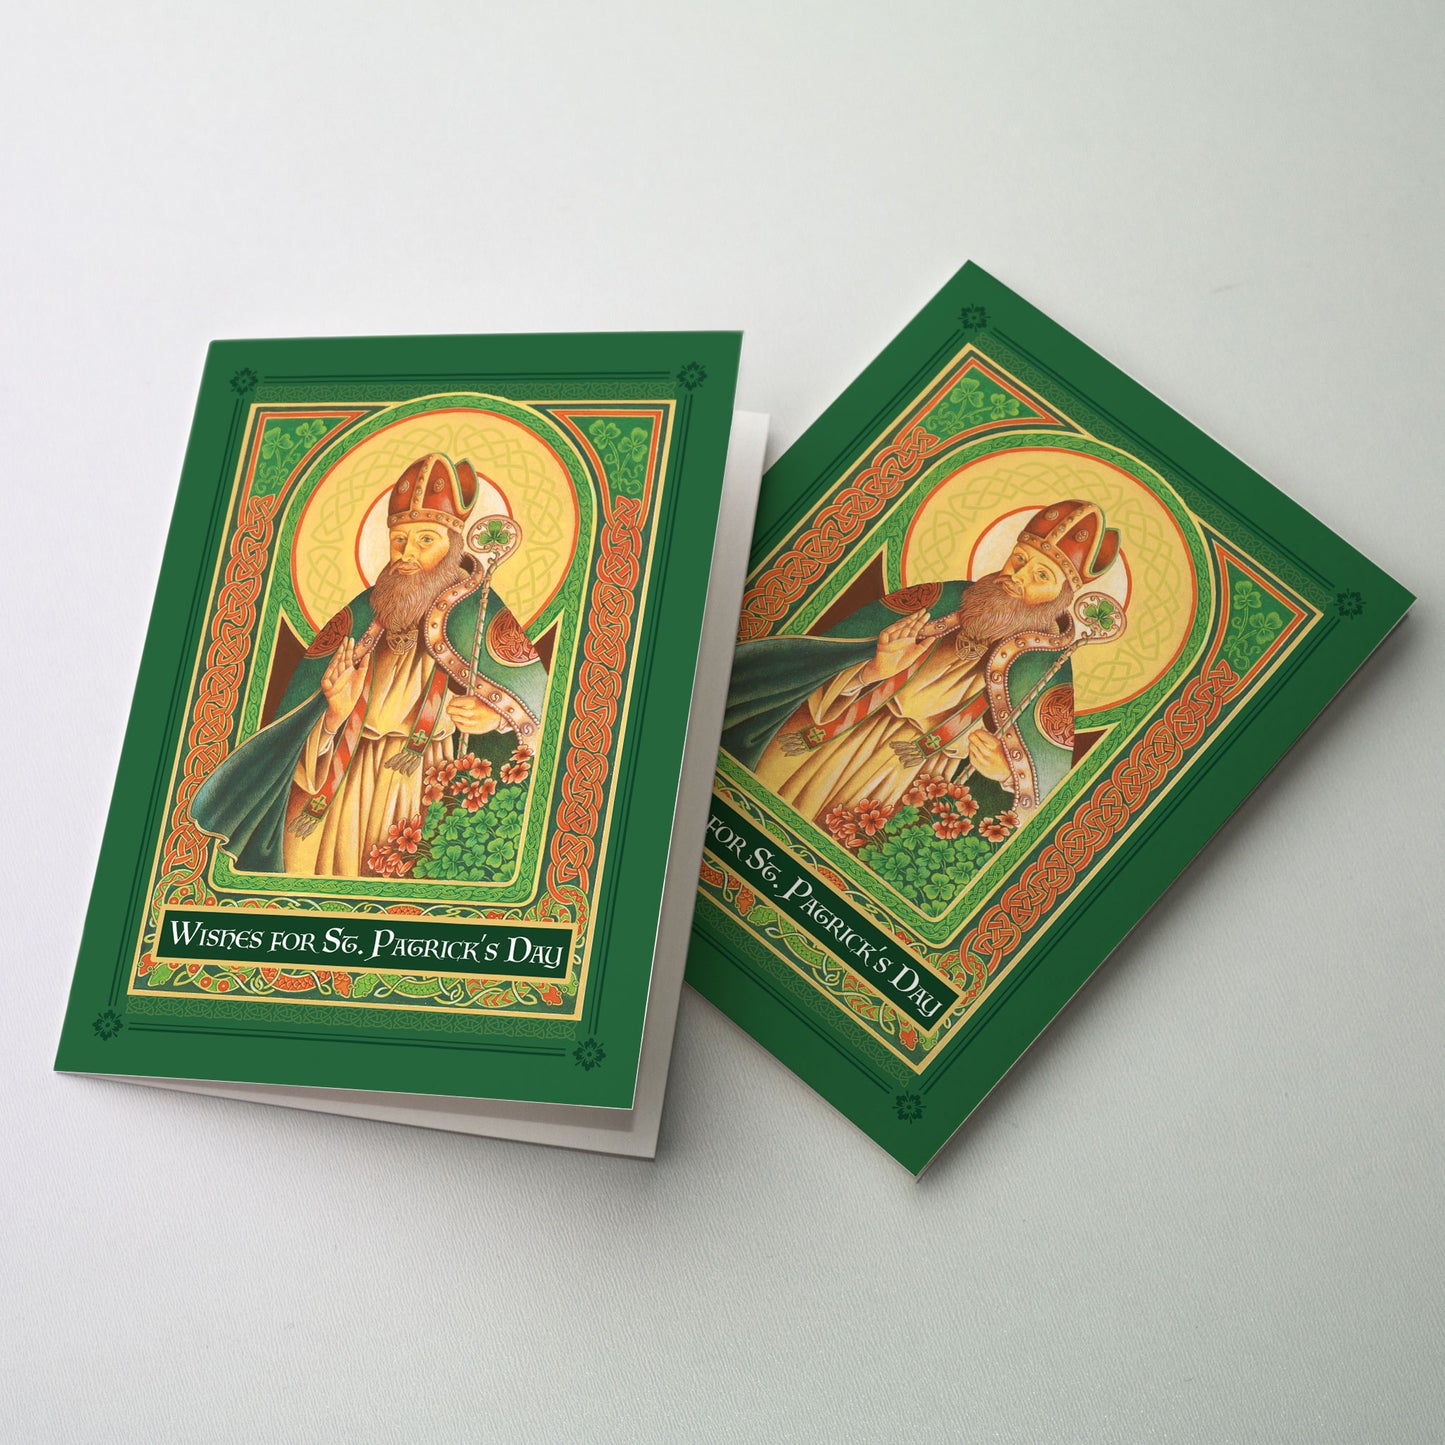 Wishes for St. Patrick's Day - St. Patrick's Day Card